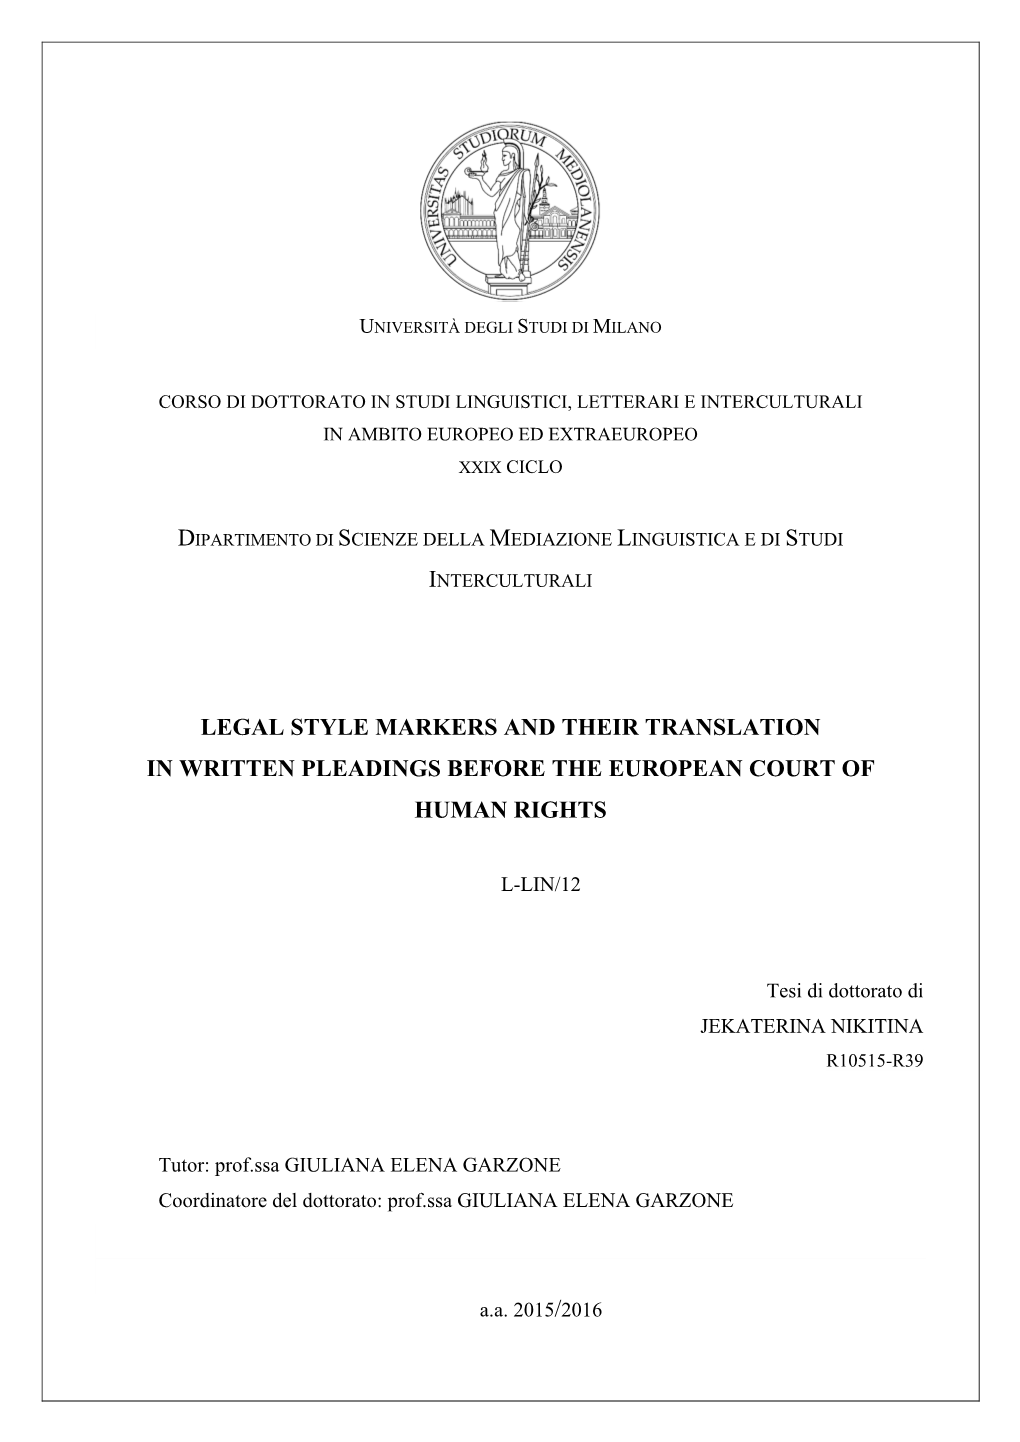 Legal Style Markers and Their Translation in Written Pleadings Before the European Court of Human Rights